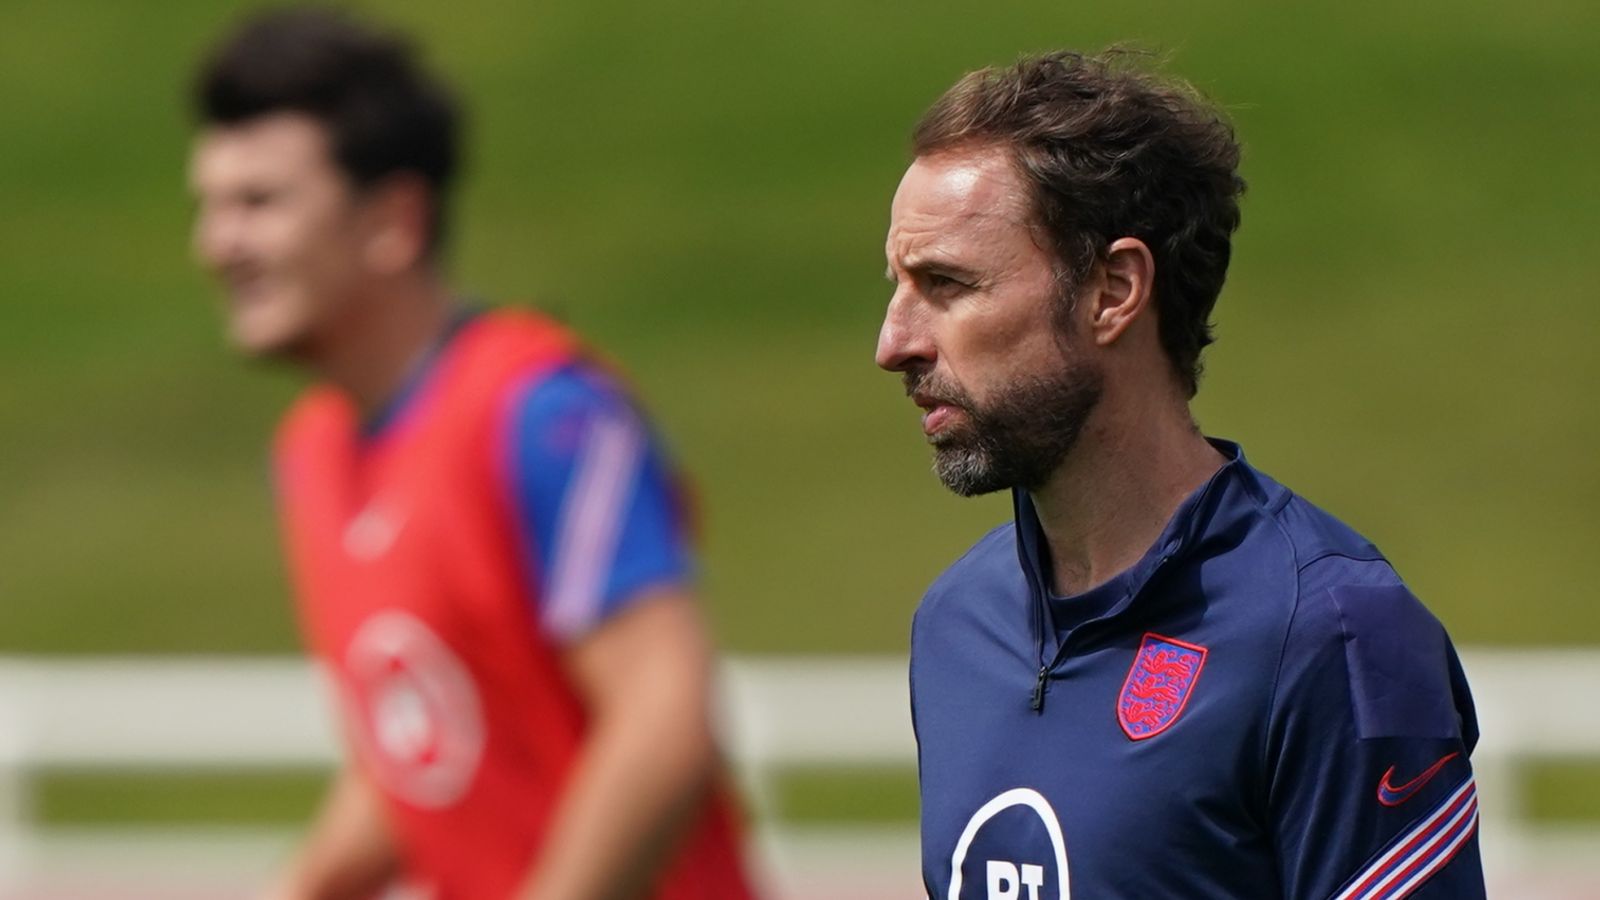 England vs Italy: Gareth Southgate says playing behind closed doors an ’embarrassment’ for country